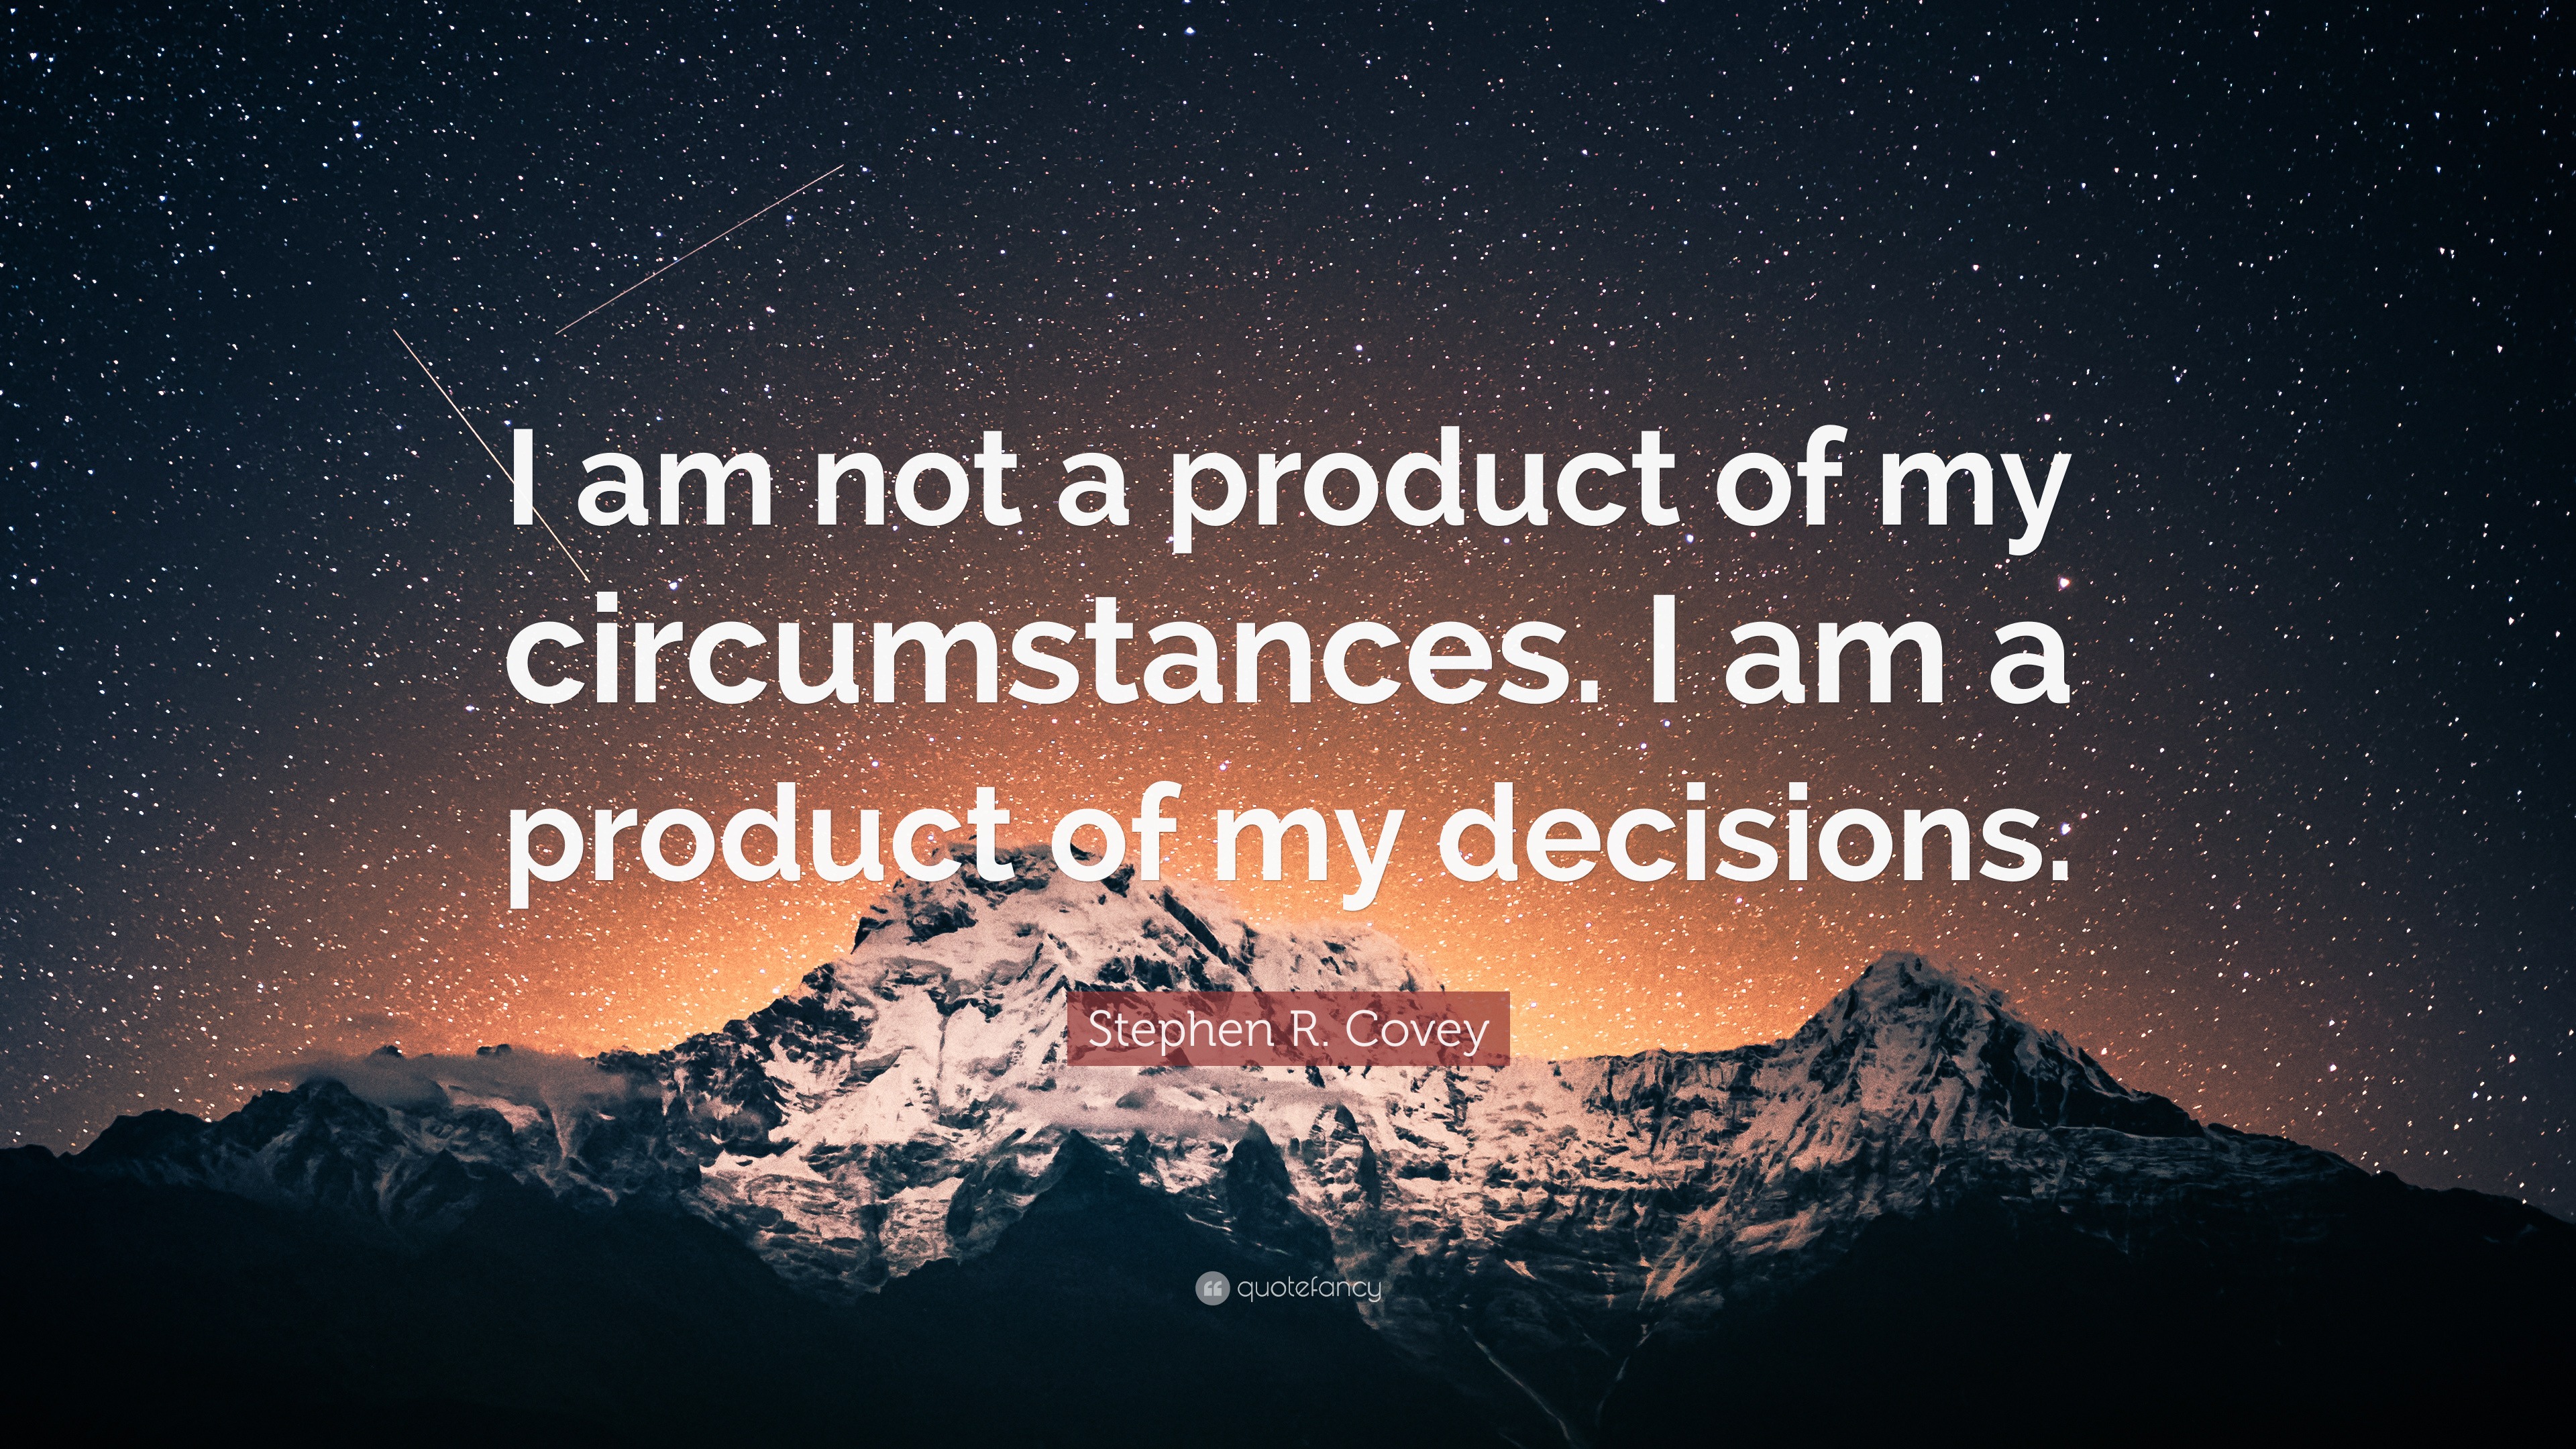 Stephen R. Covey Quote: “I am not a product of my circumstances. I am a